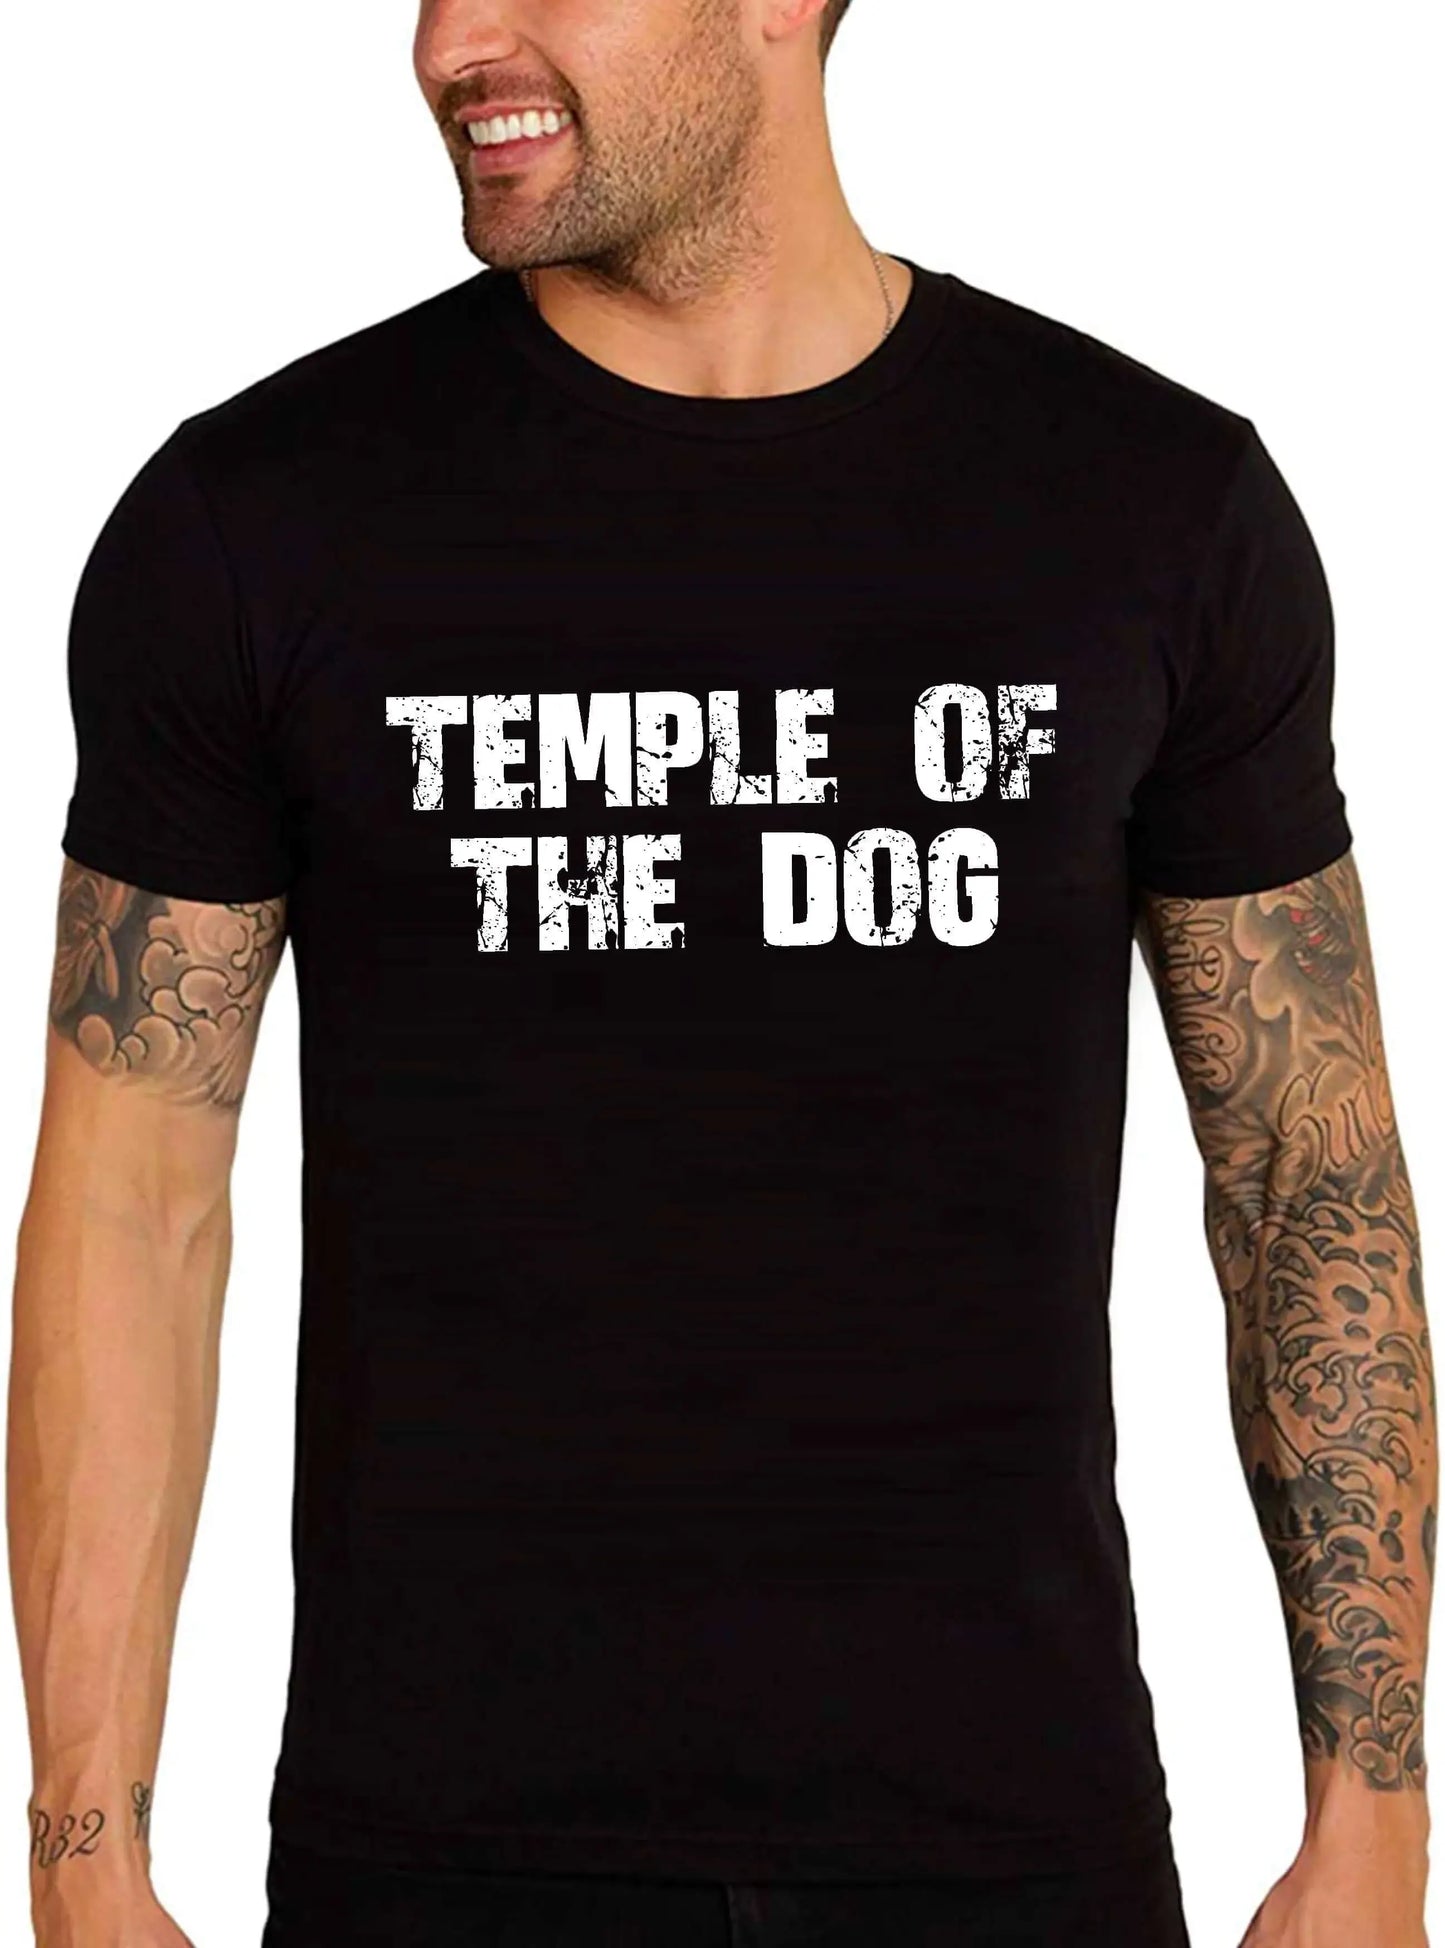 Men's Graphic T-Shirt Temple Of The Dog Eco-Friendly Limited Edition Short Sleeve Tee-Shirt Vintage Birthday Gift Novelty